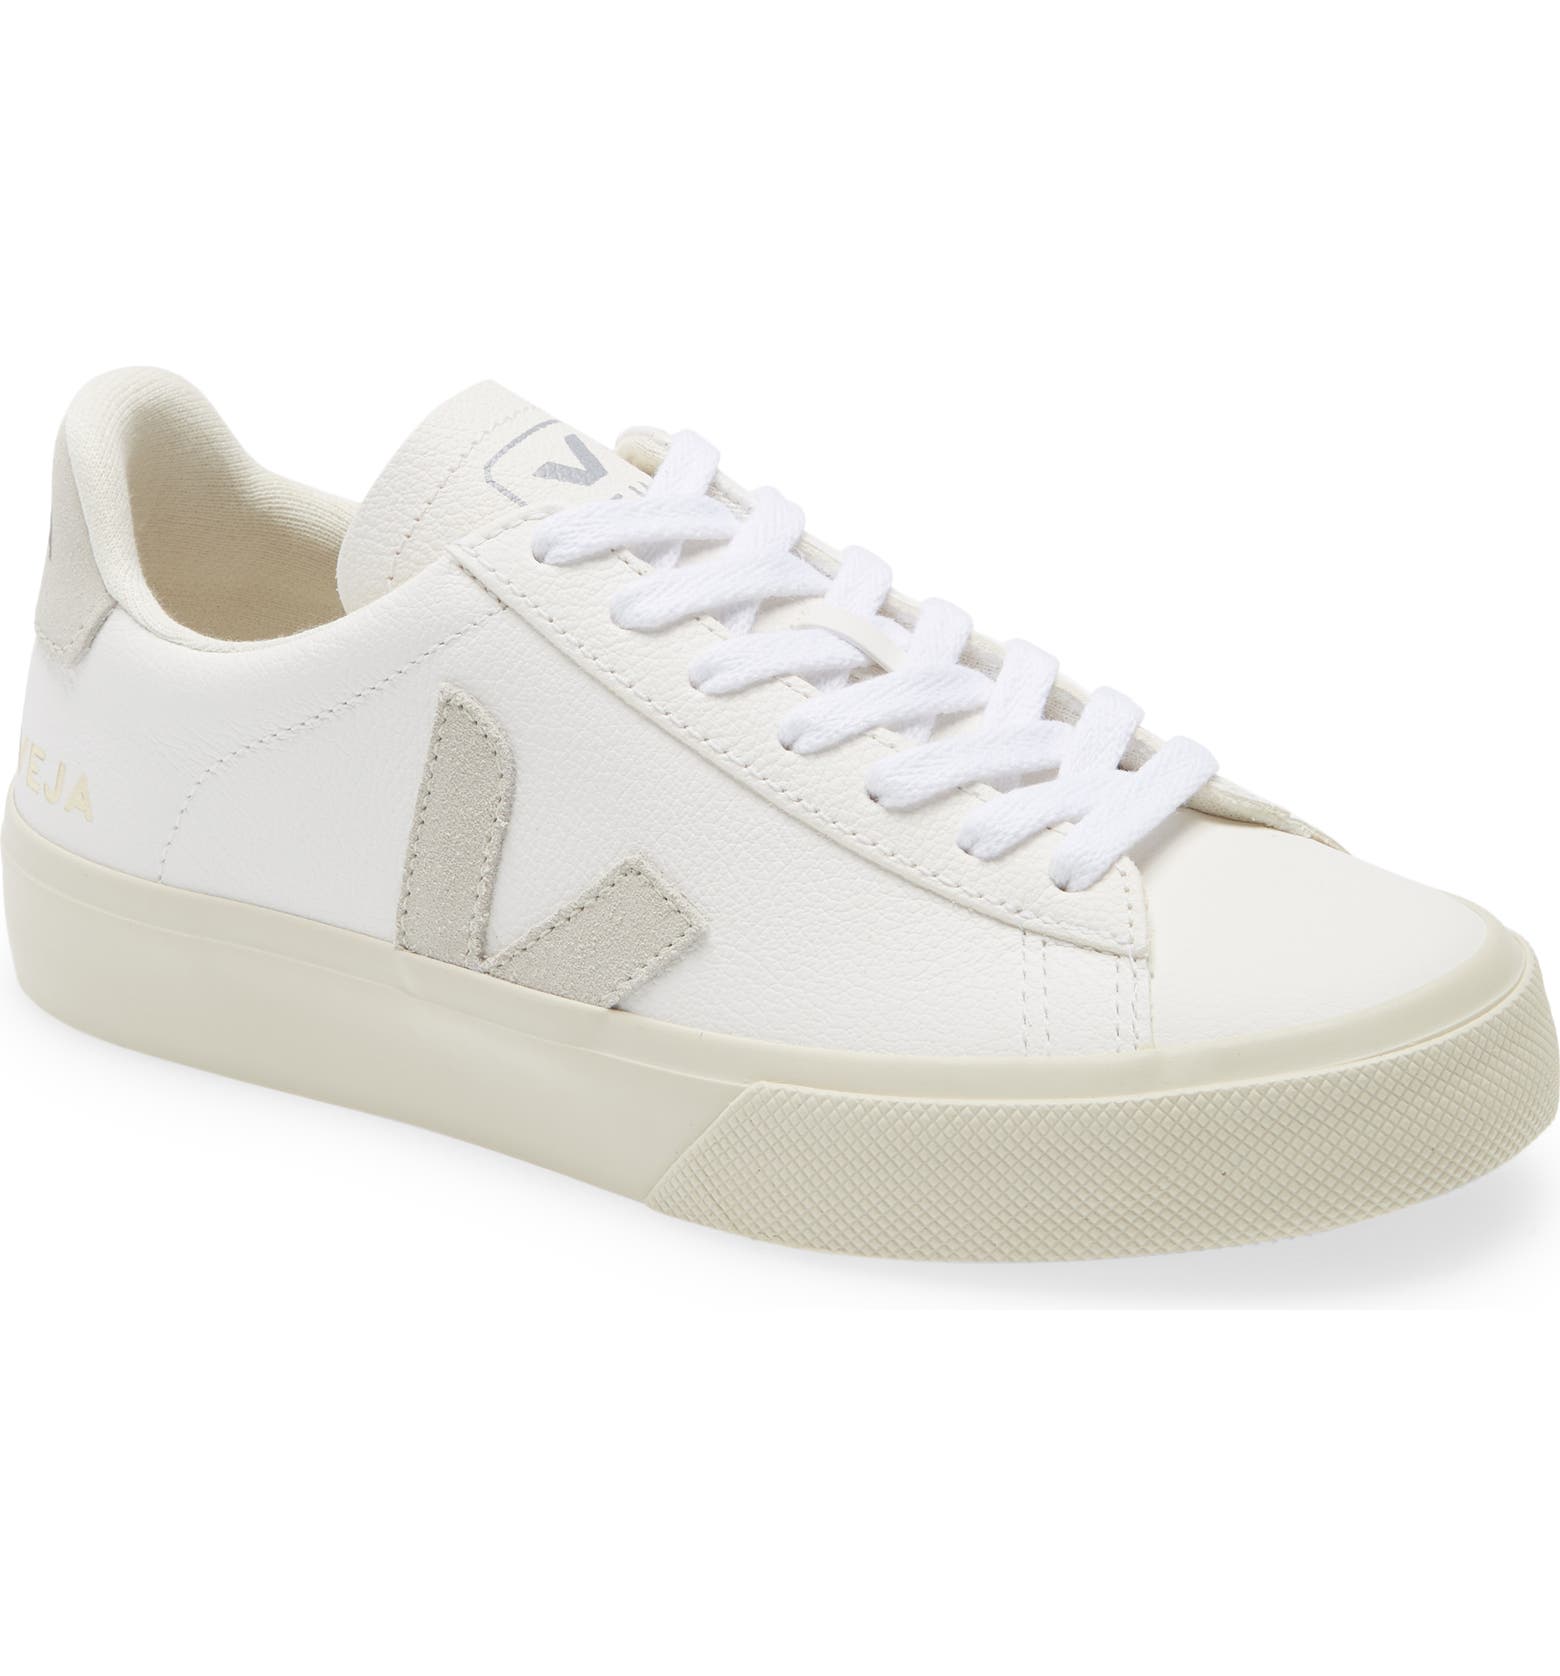 White and light grey Veja sneakers